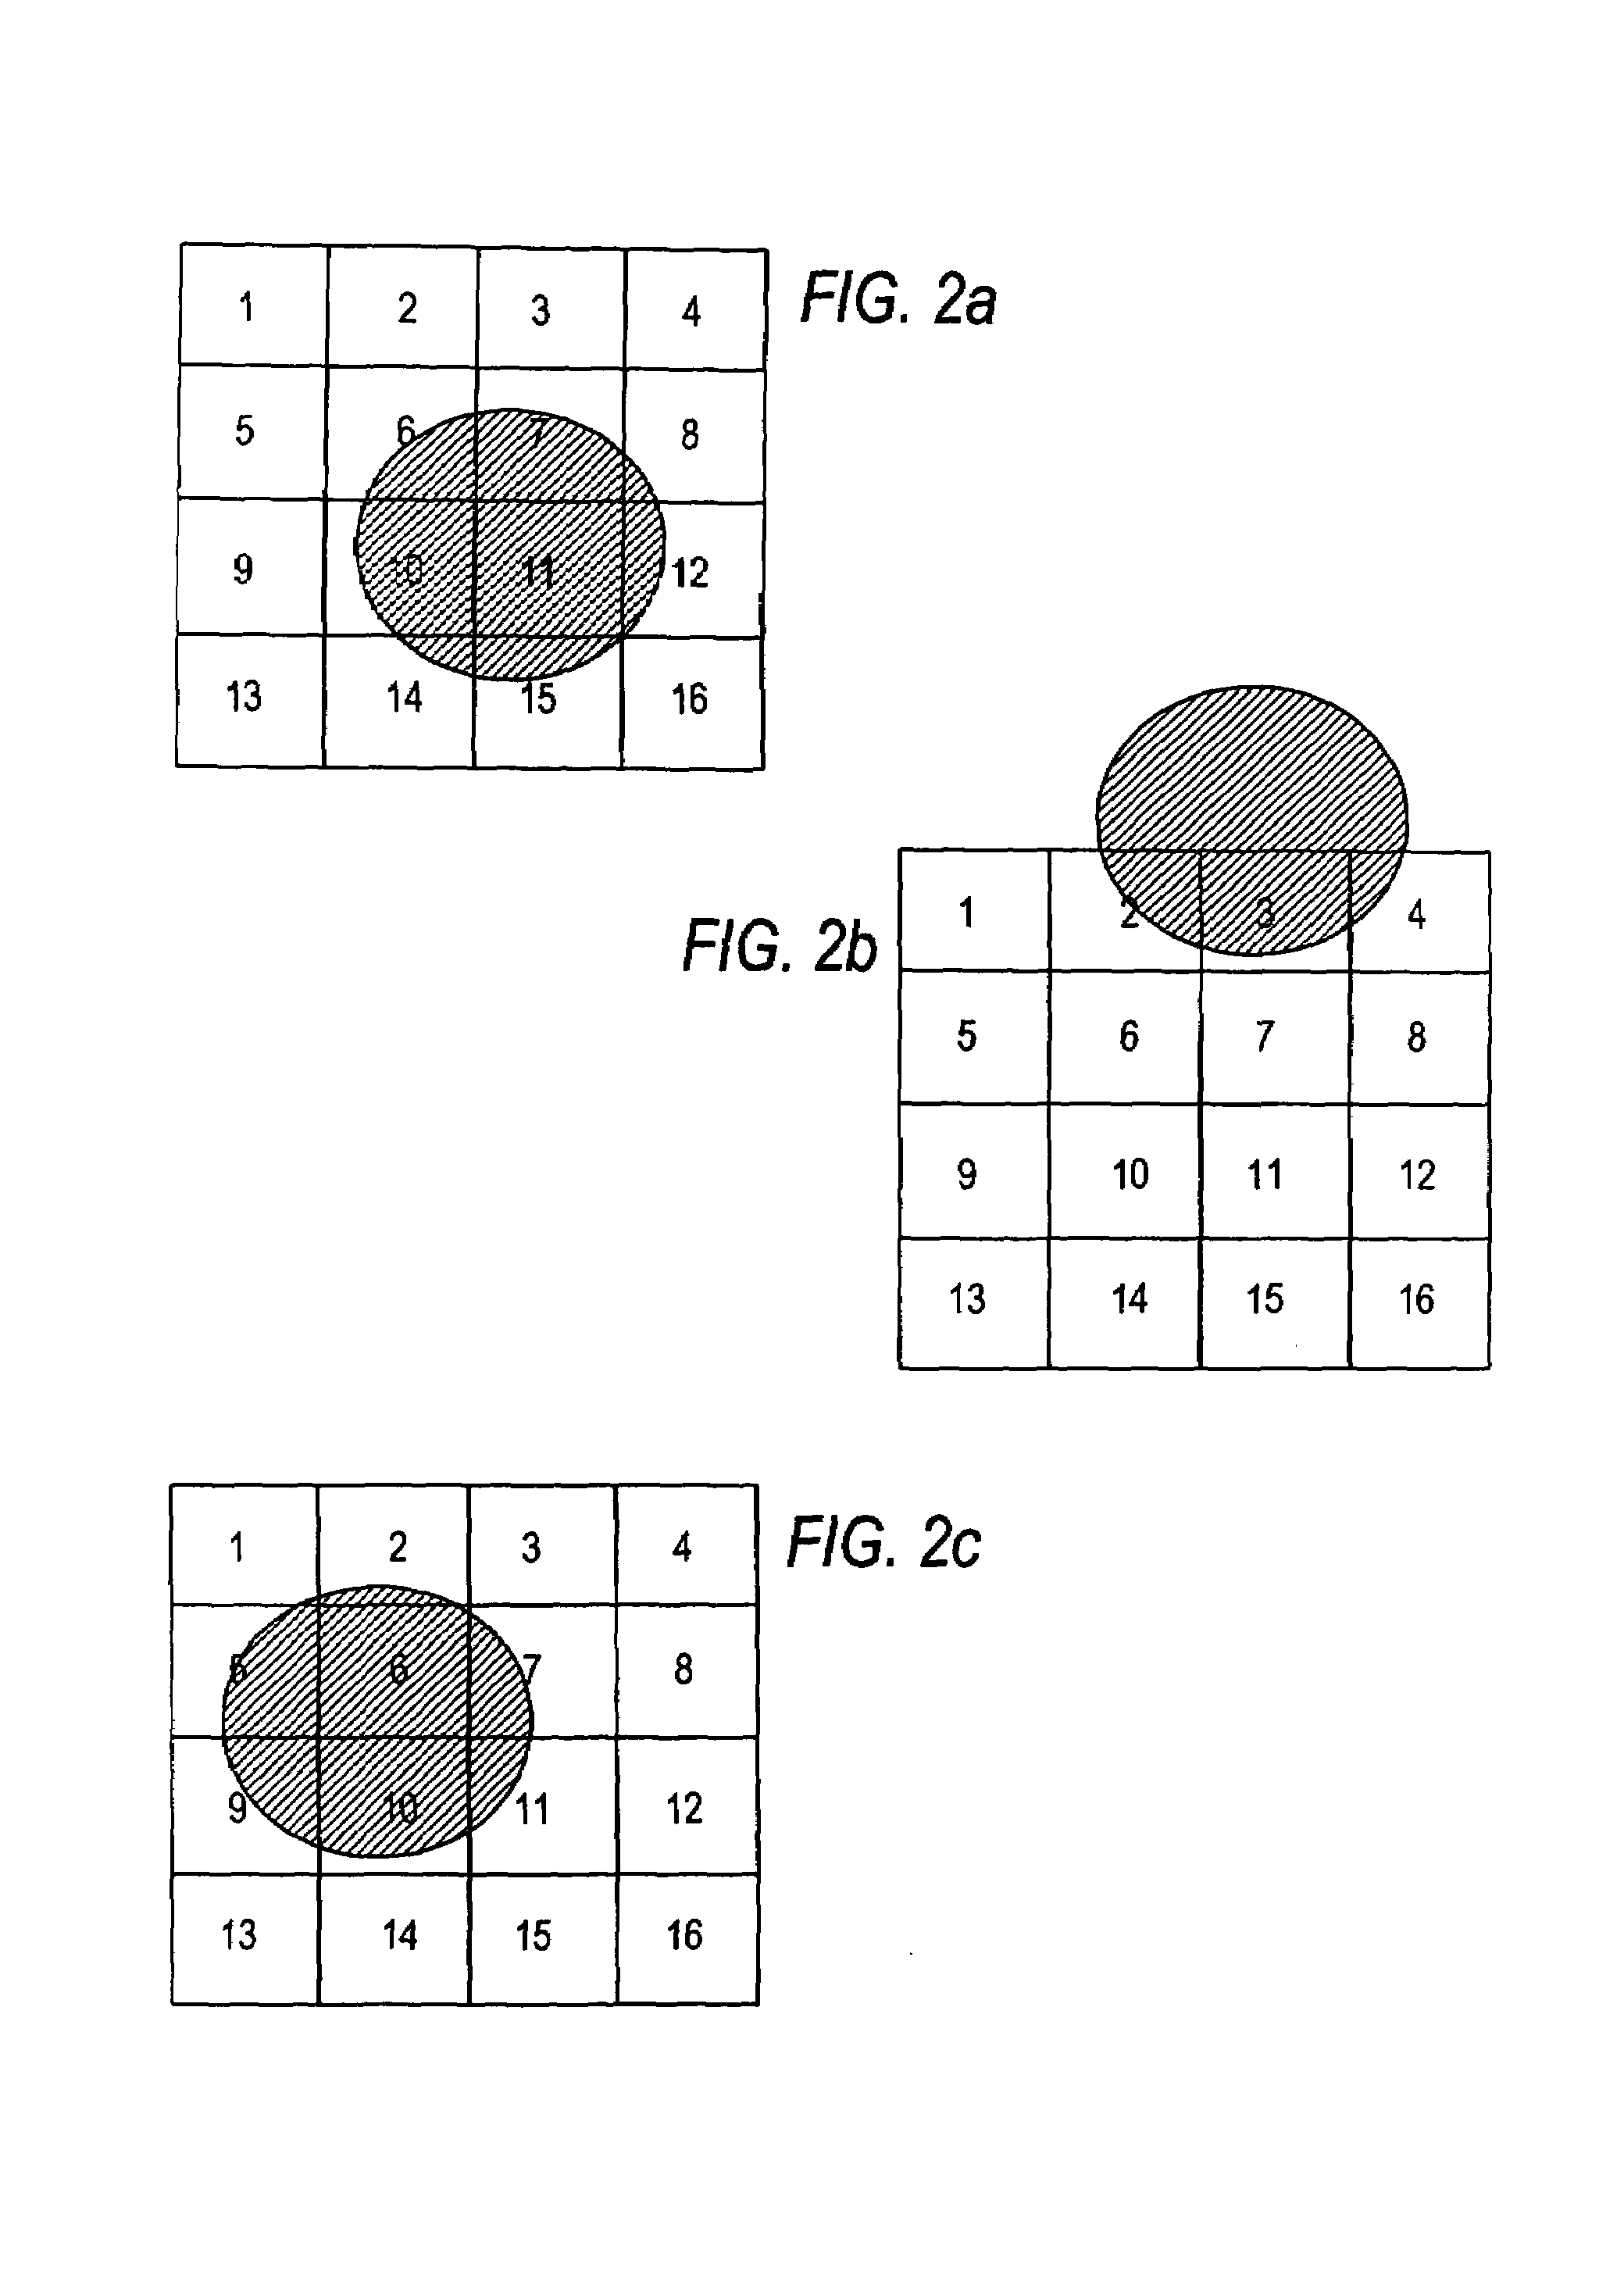 Method for automatic determination of validity or invalidity of input from a keyboard or a keypad